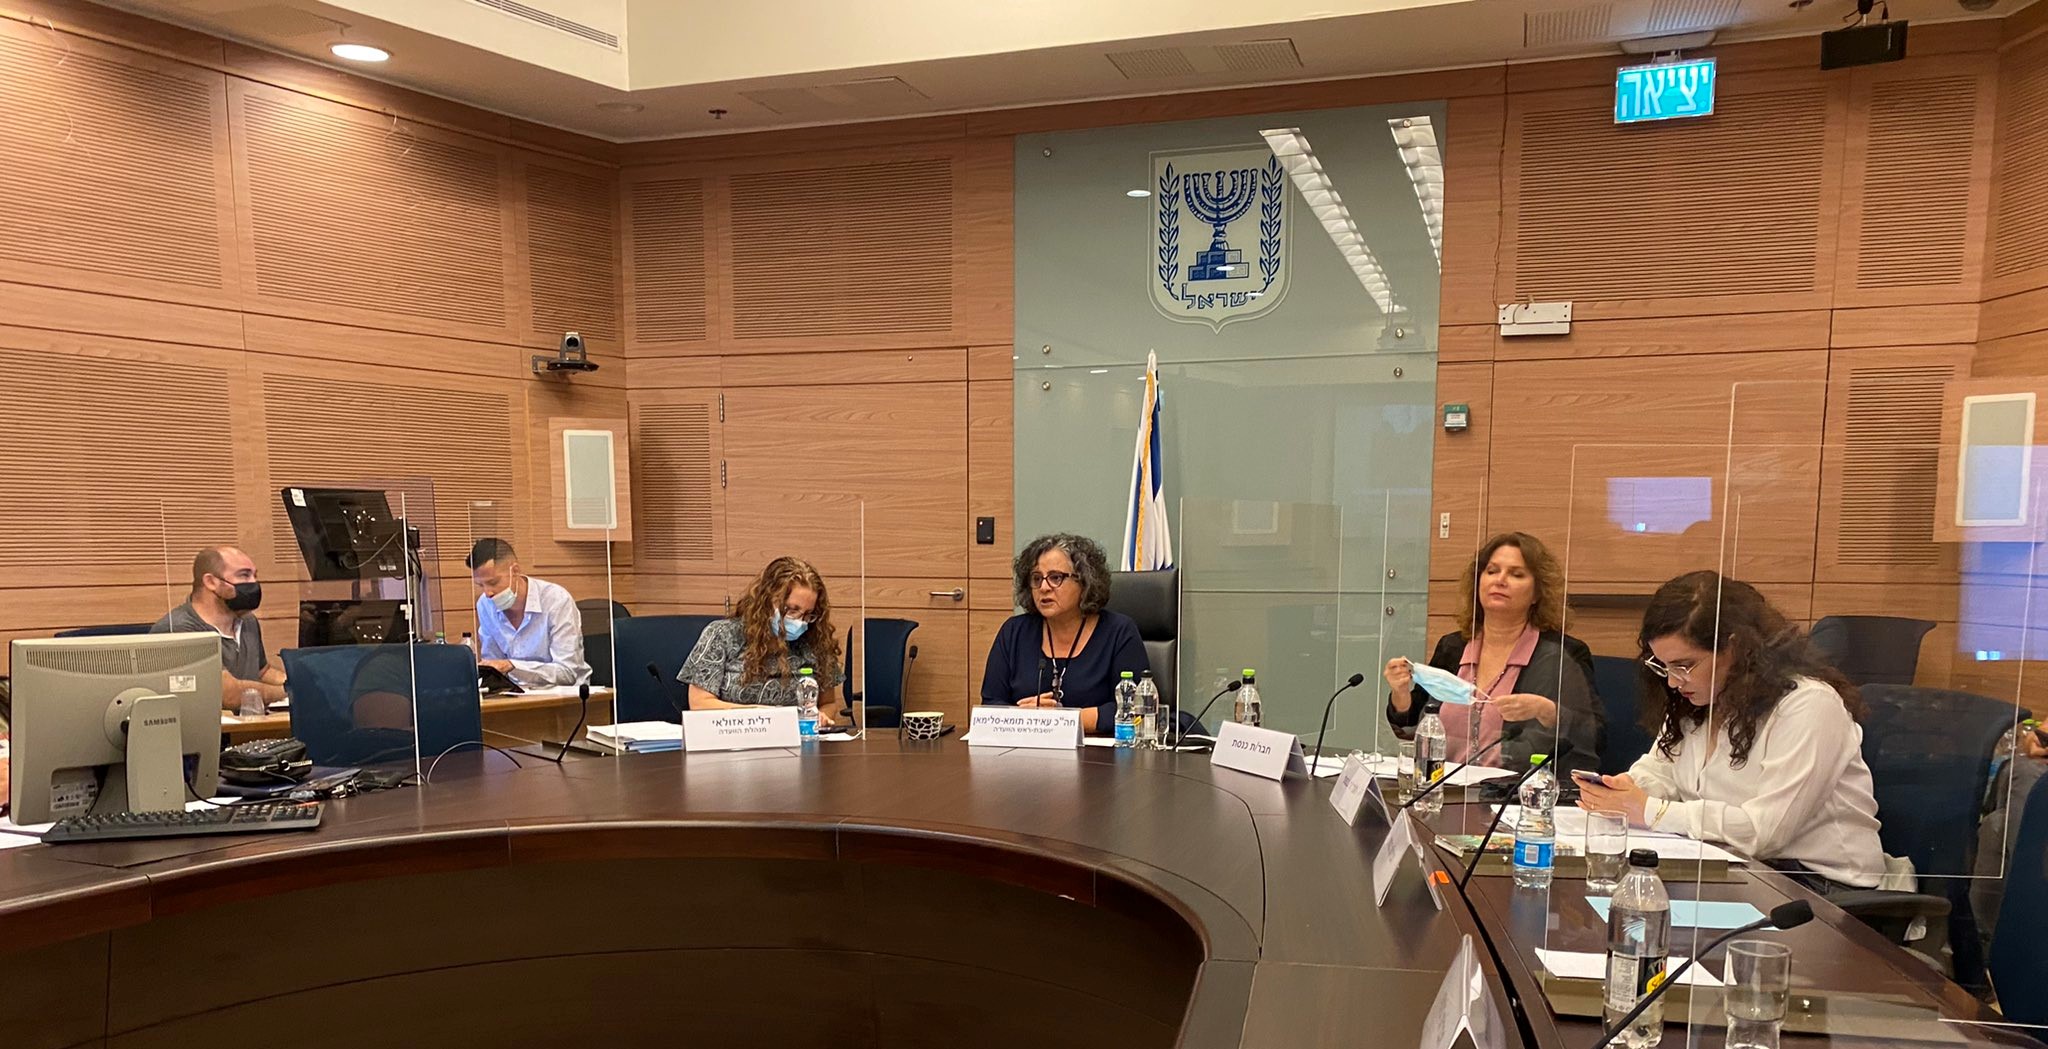 The Knesset's Committee on the Status of Women and Gender Equality convened on Wednesday, October 6, to discuss reports of sexual harassment and abuse of employees at Israel's Public Broadcasting Corporation, Kan.